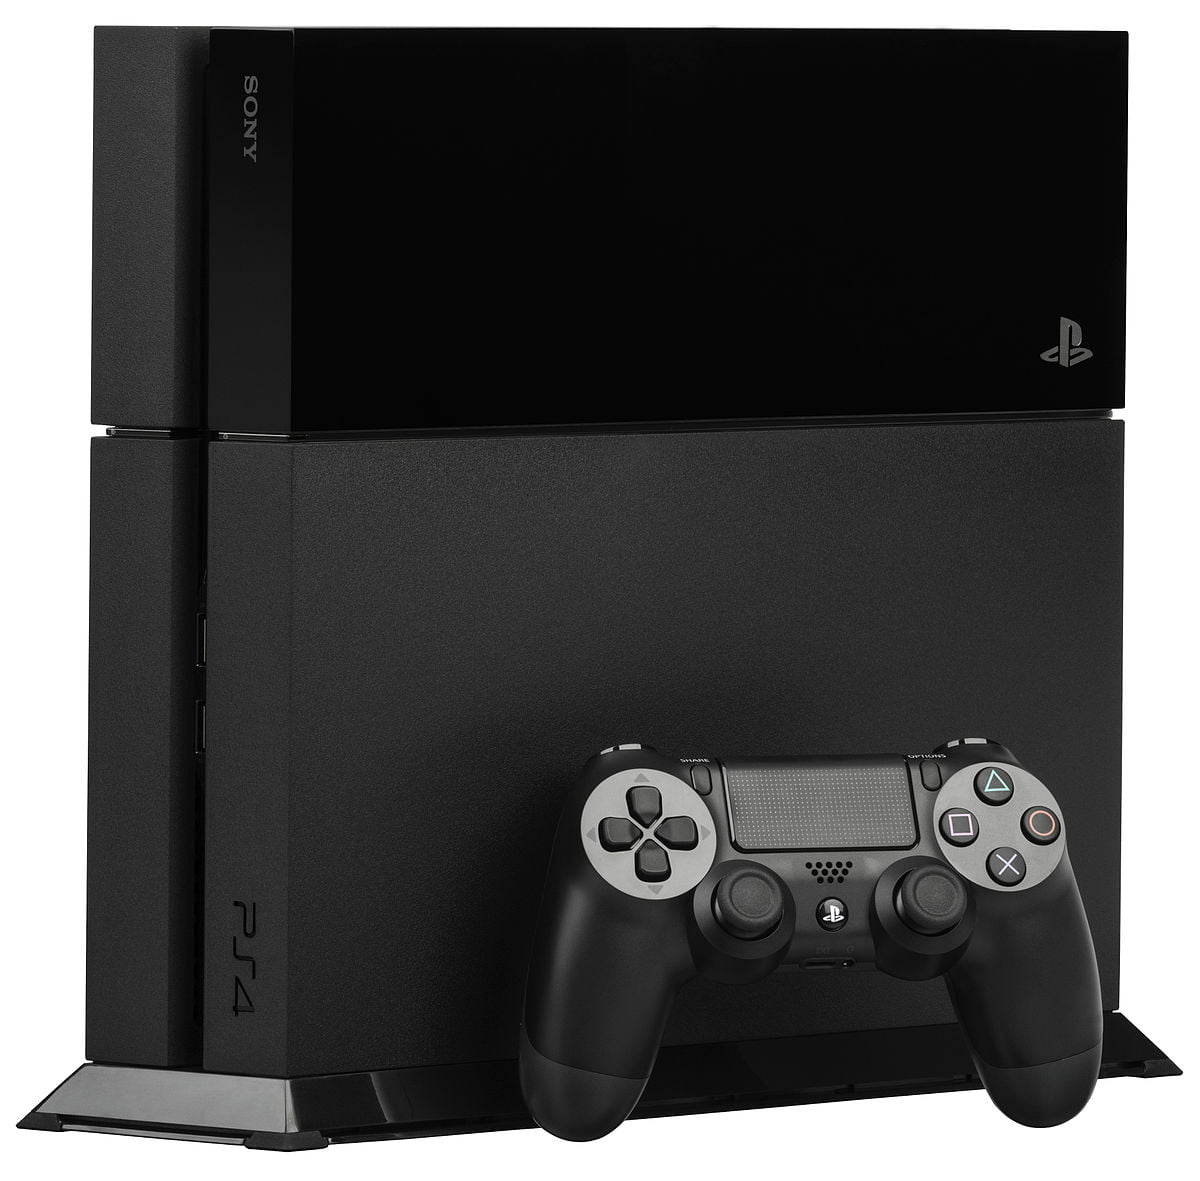 Sony is officially discontinuing most PS4 models